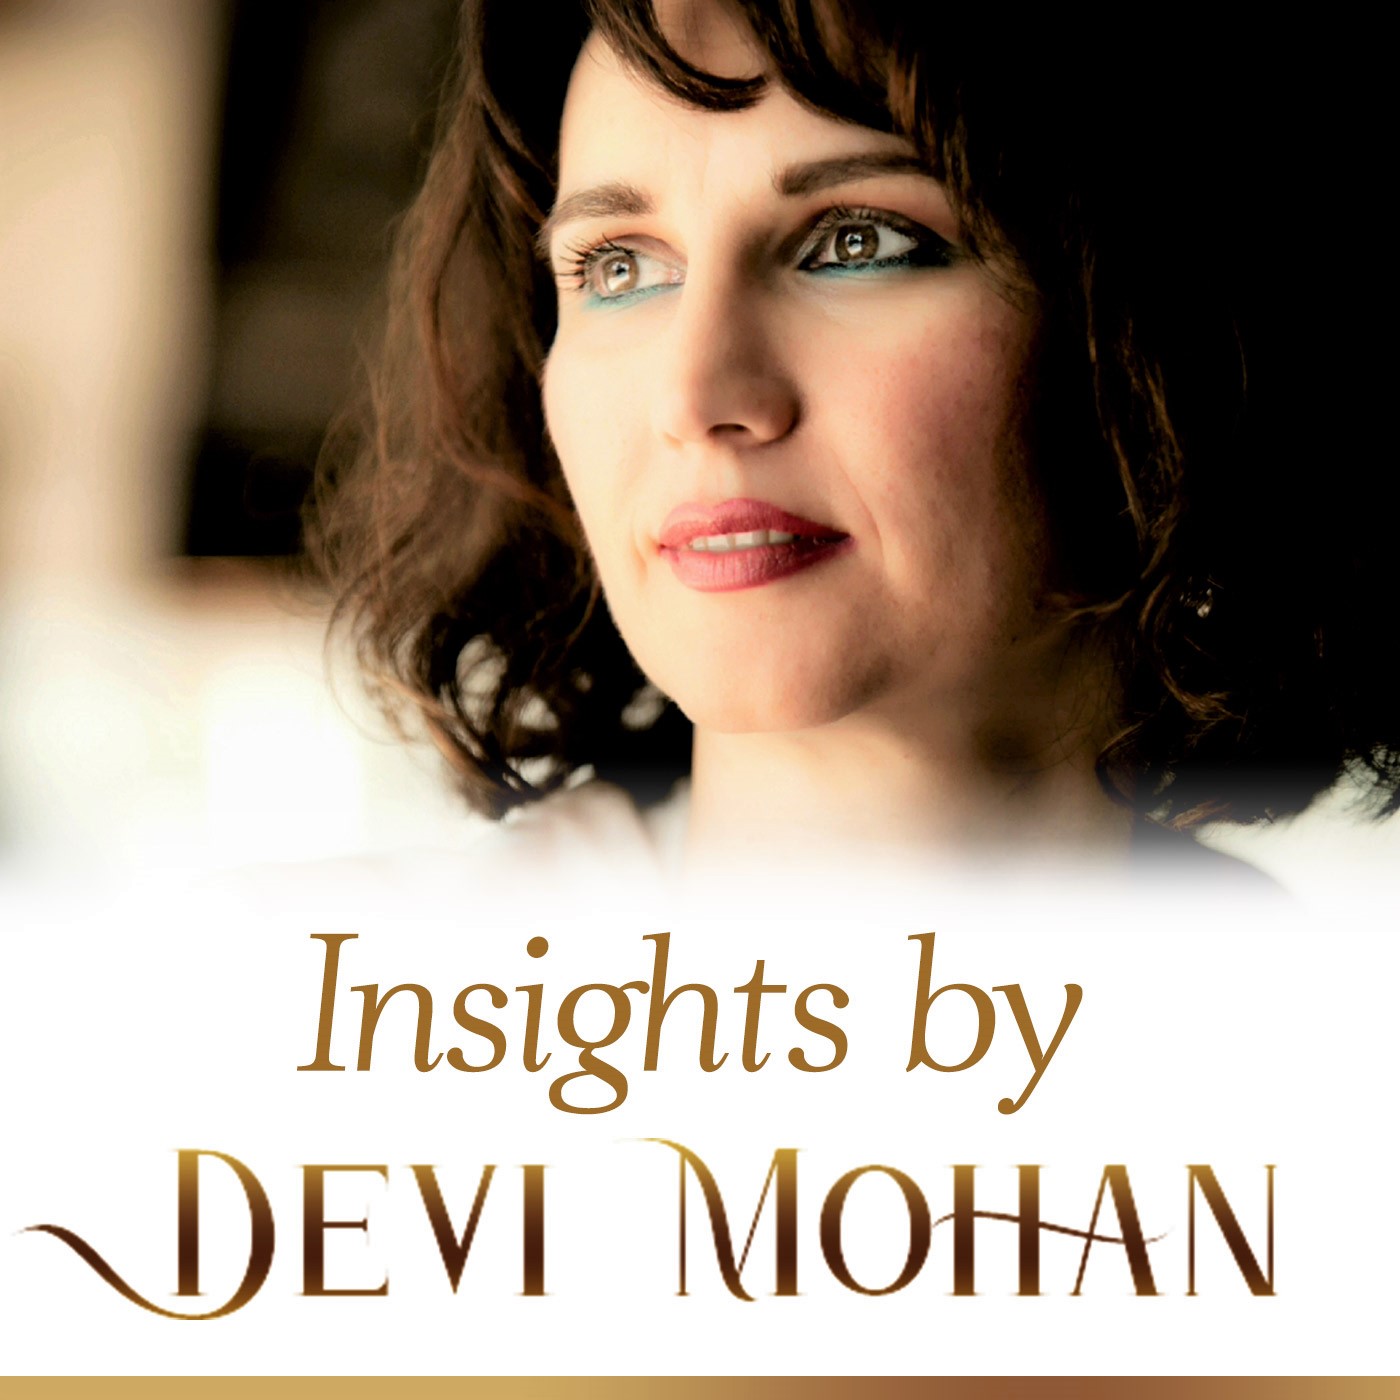 Insights by Devi Mohan